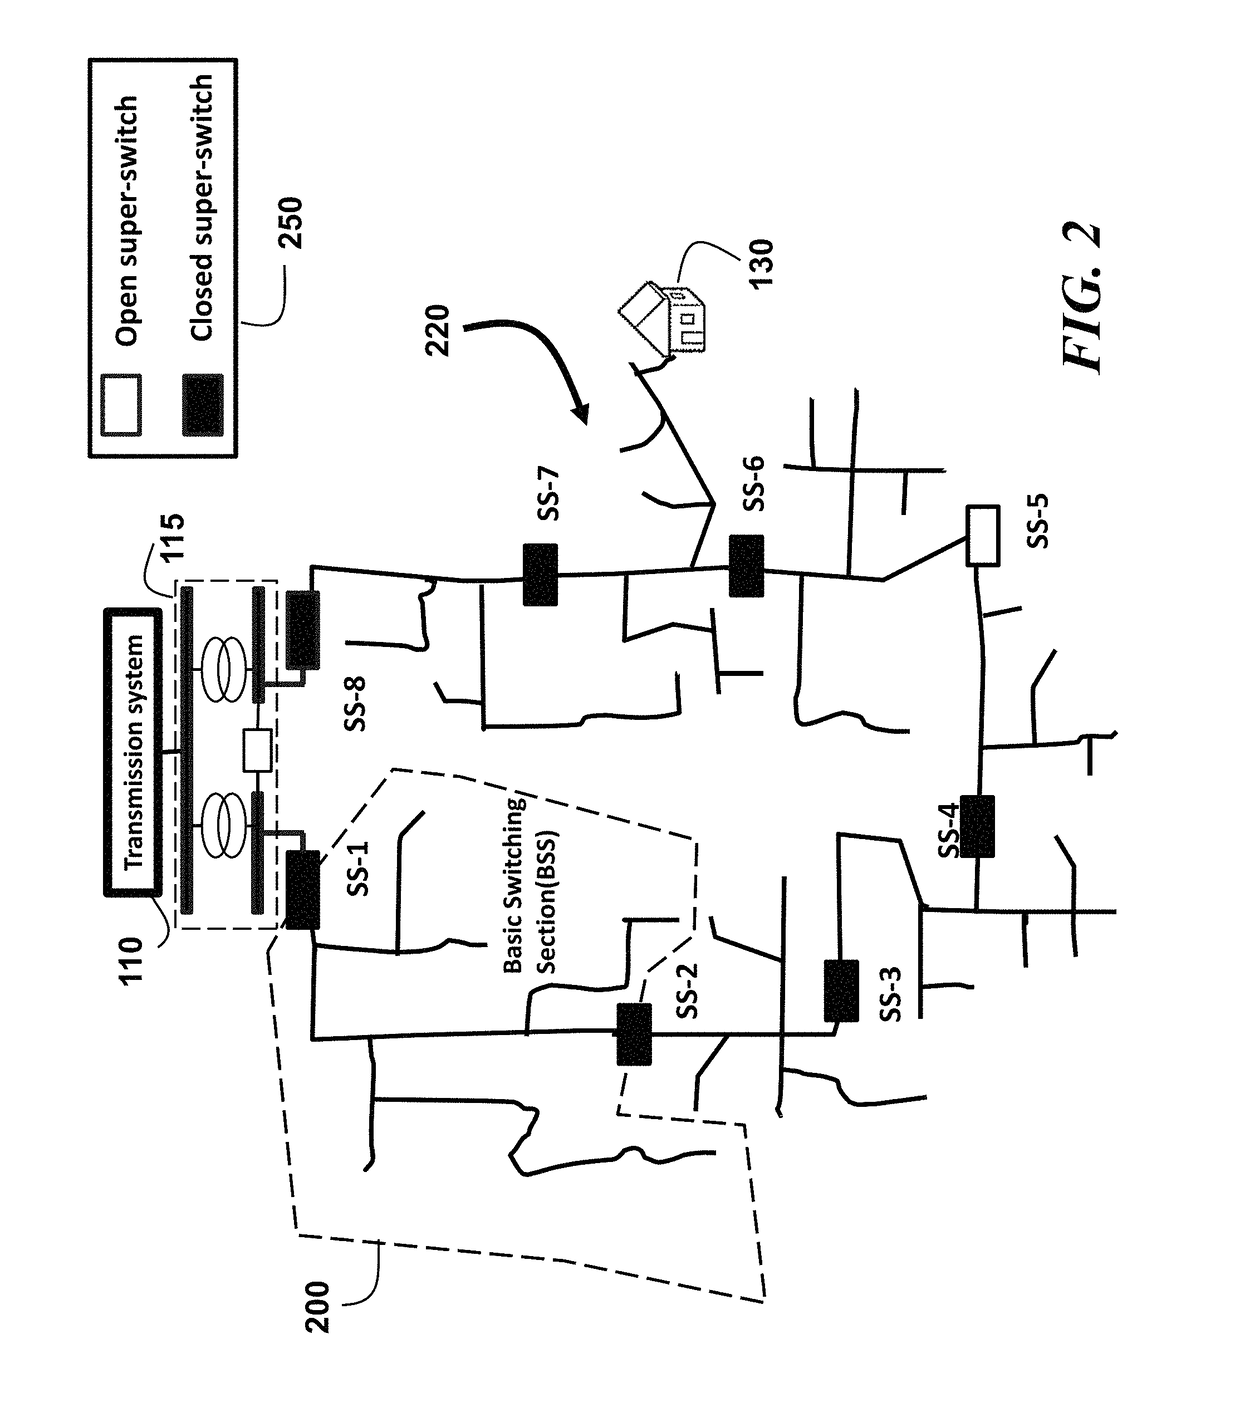 Dynamic and adaptive configurable power distribution system